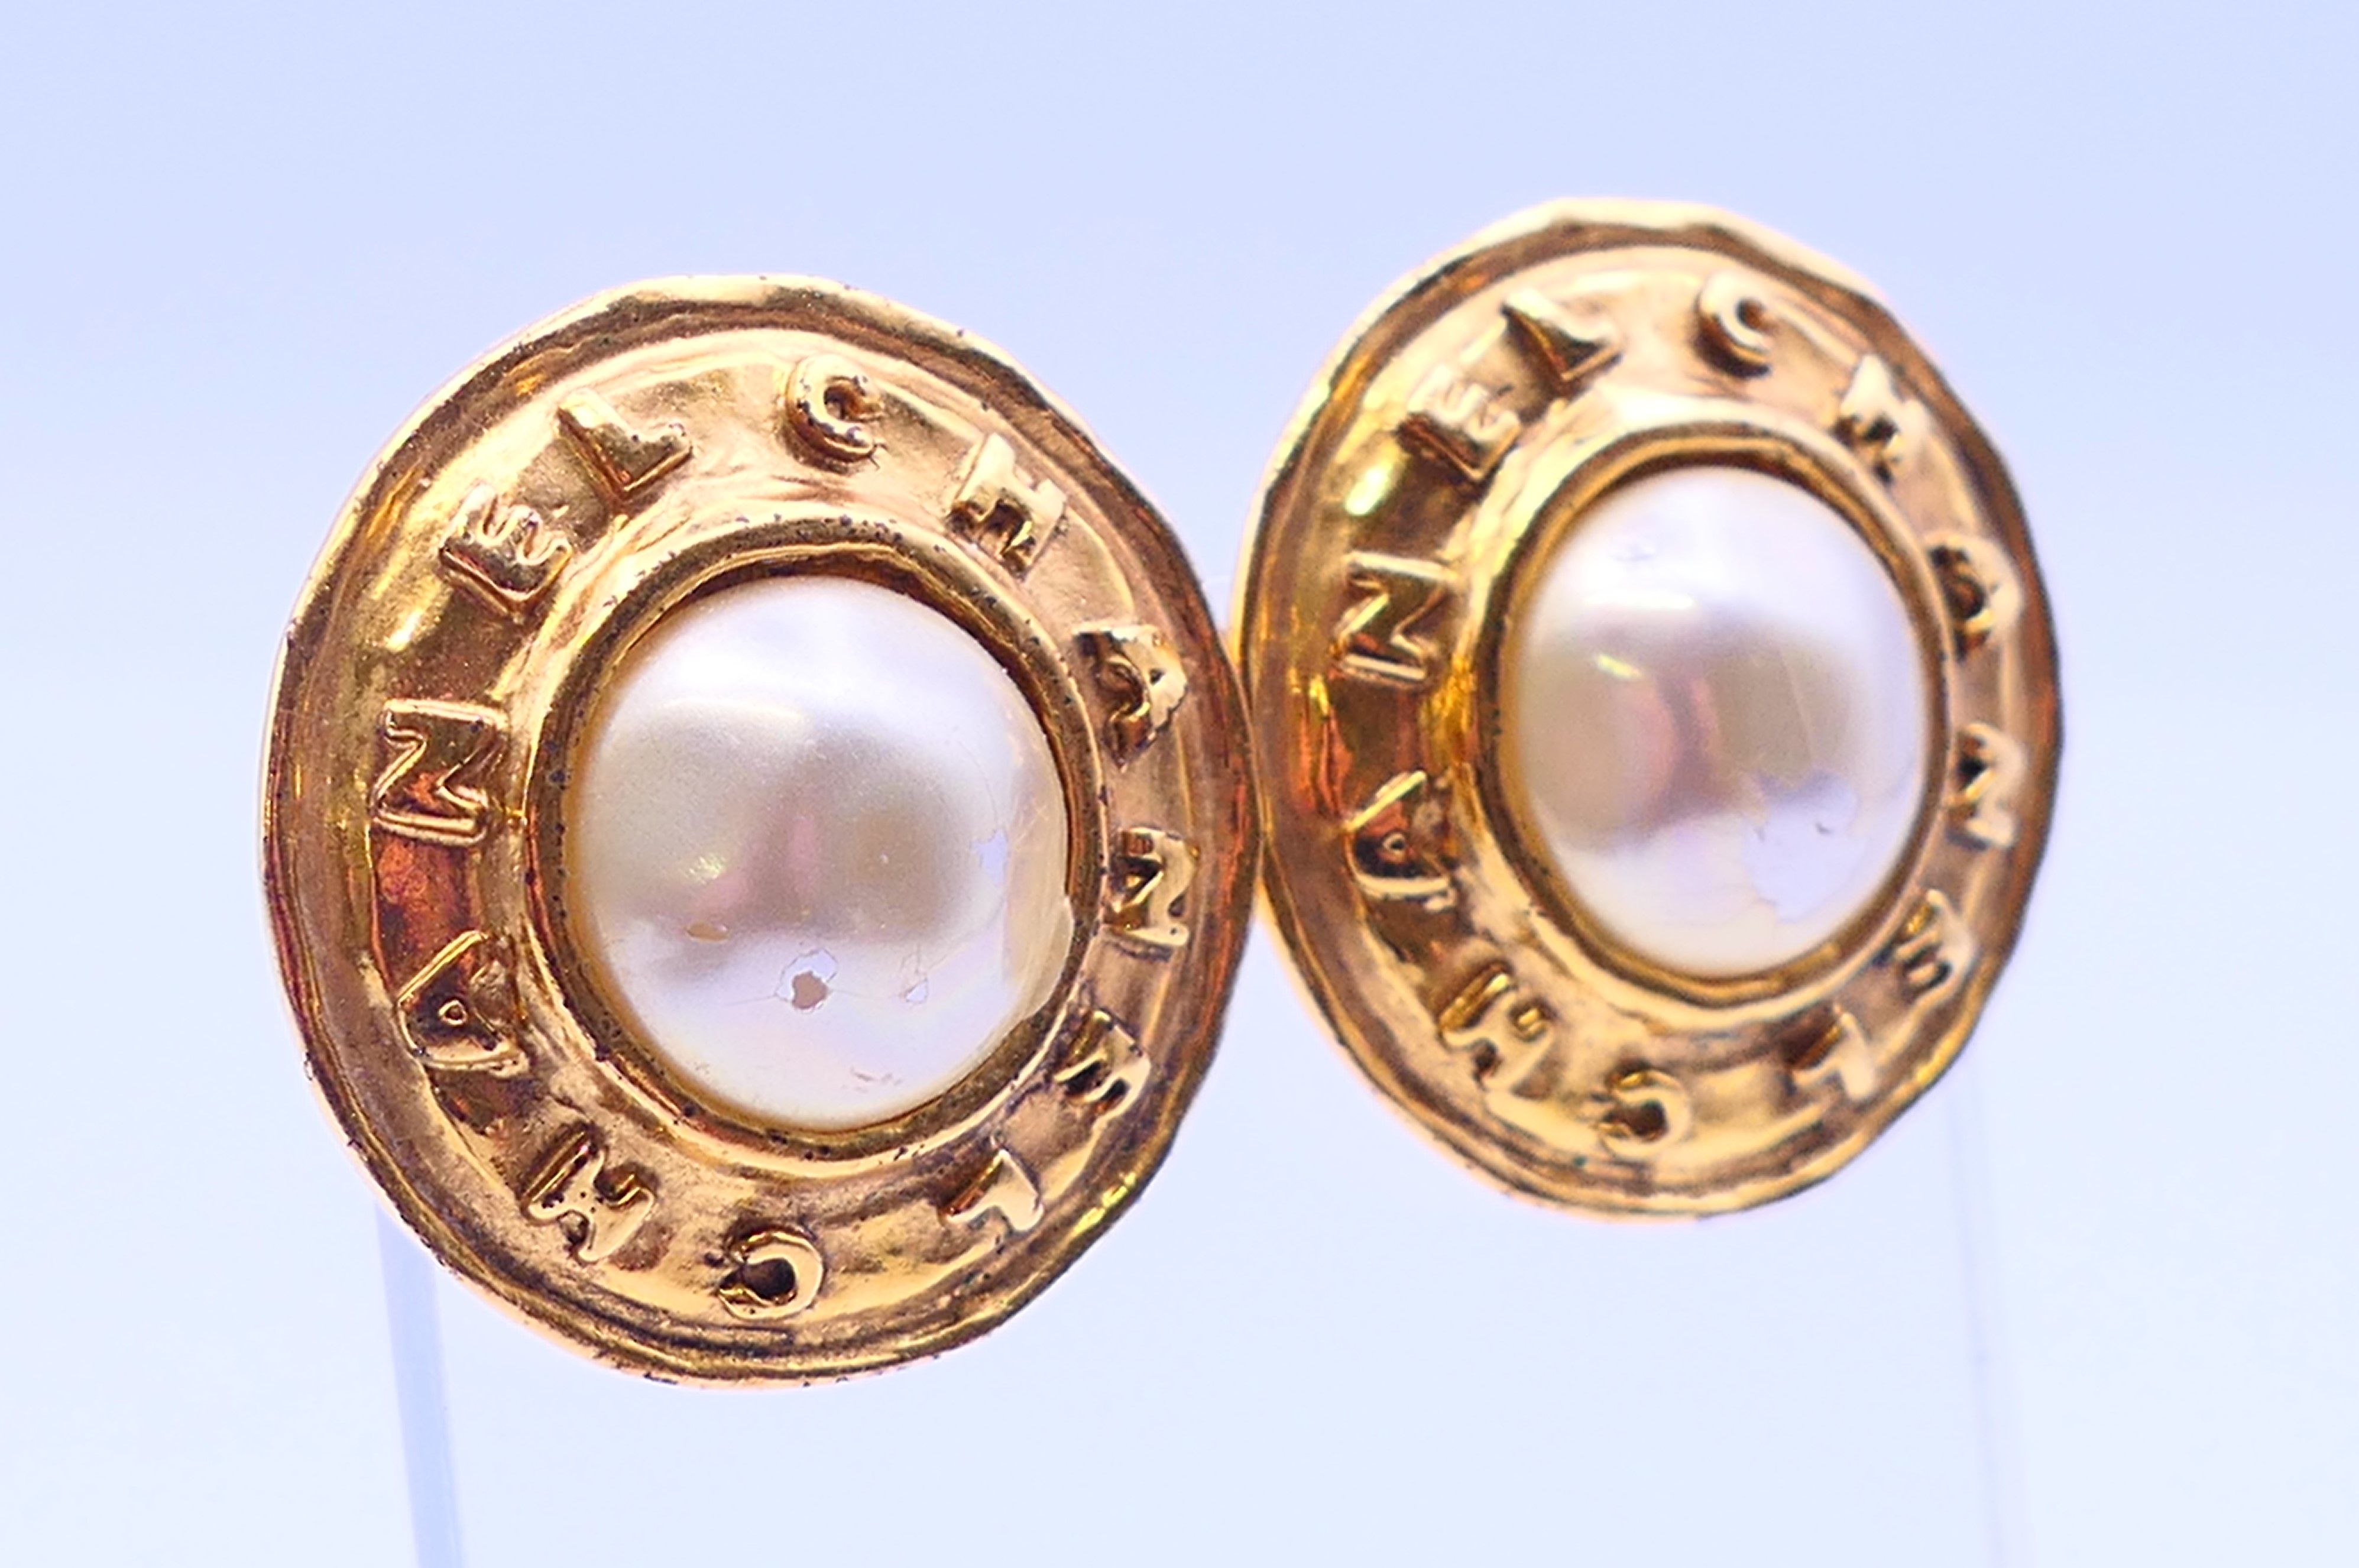 A pair of Chanel faux pearl clip-on earrings in a Chanel box, model number 2813. 3 cm diameter. - Image 2 of 7